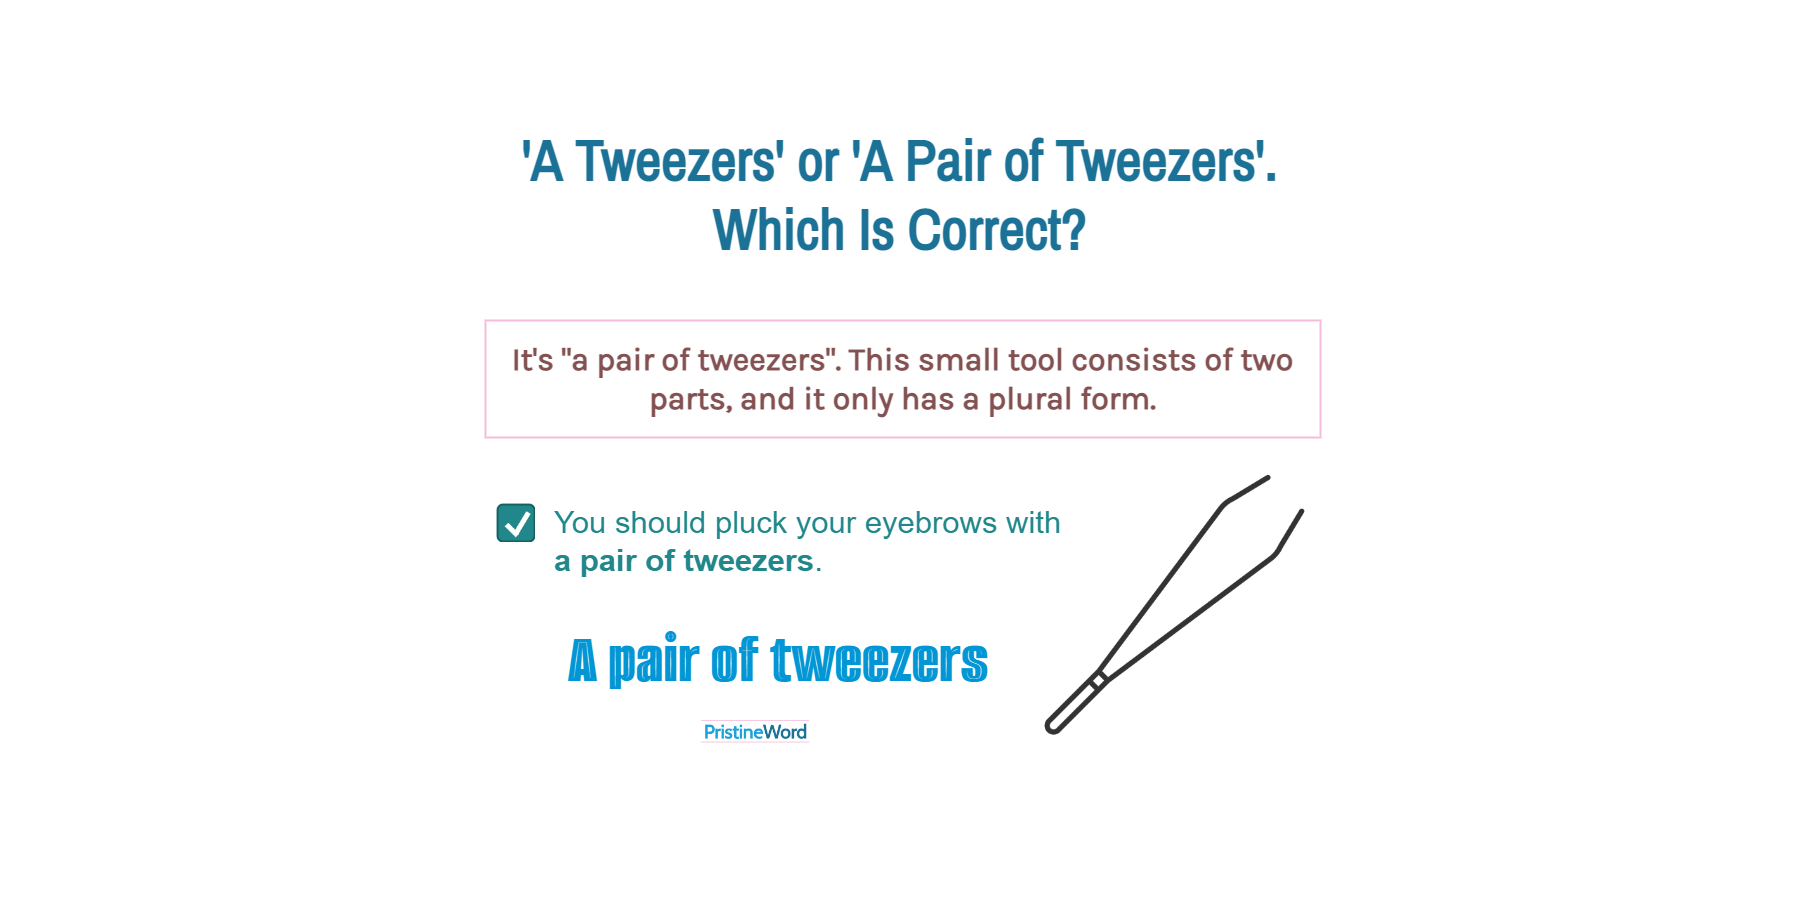 'A Tweezers' or 'A Pair of Tweezers'. Which Is Correct?